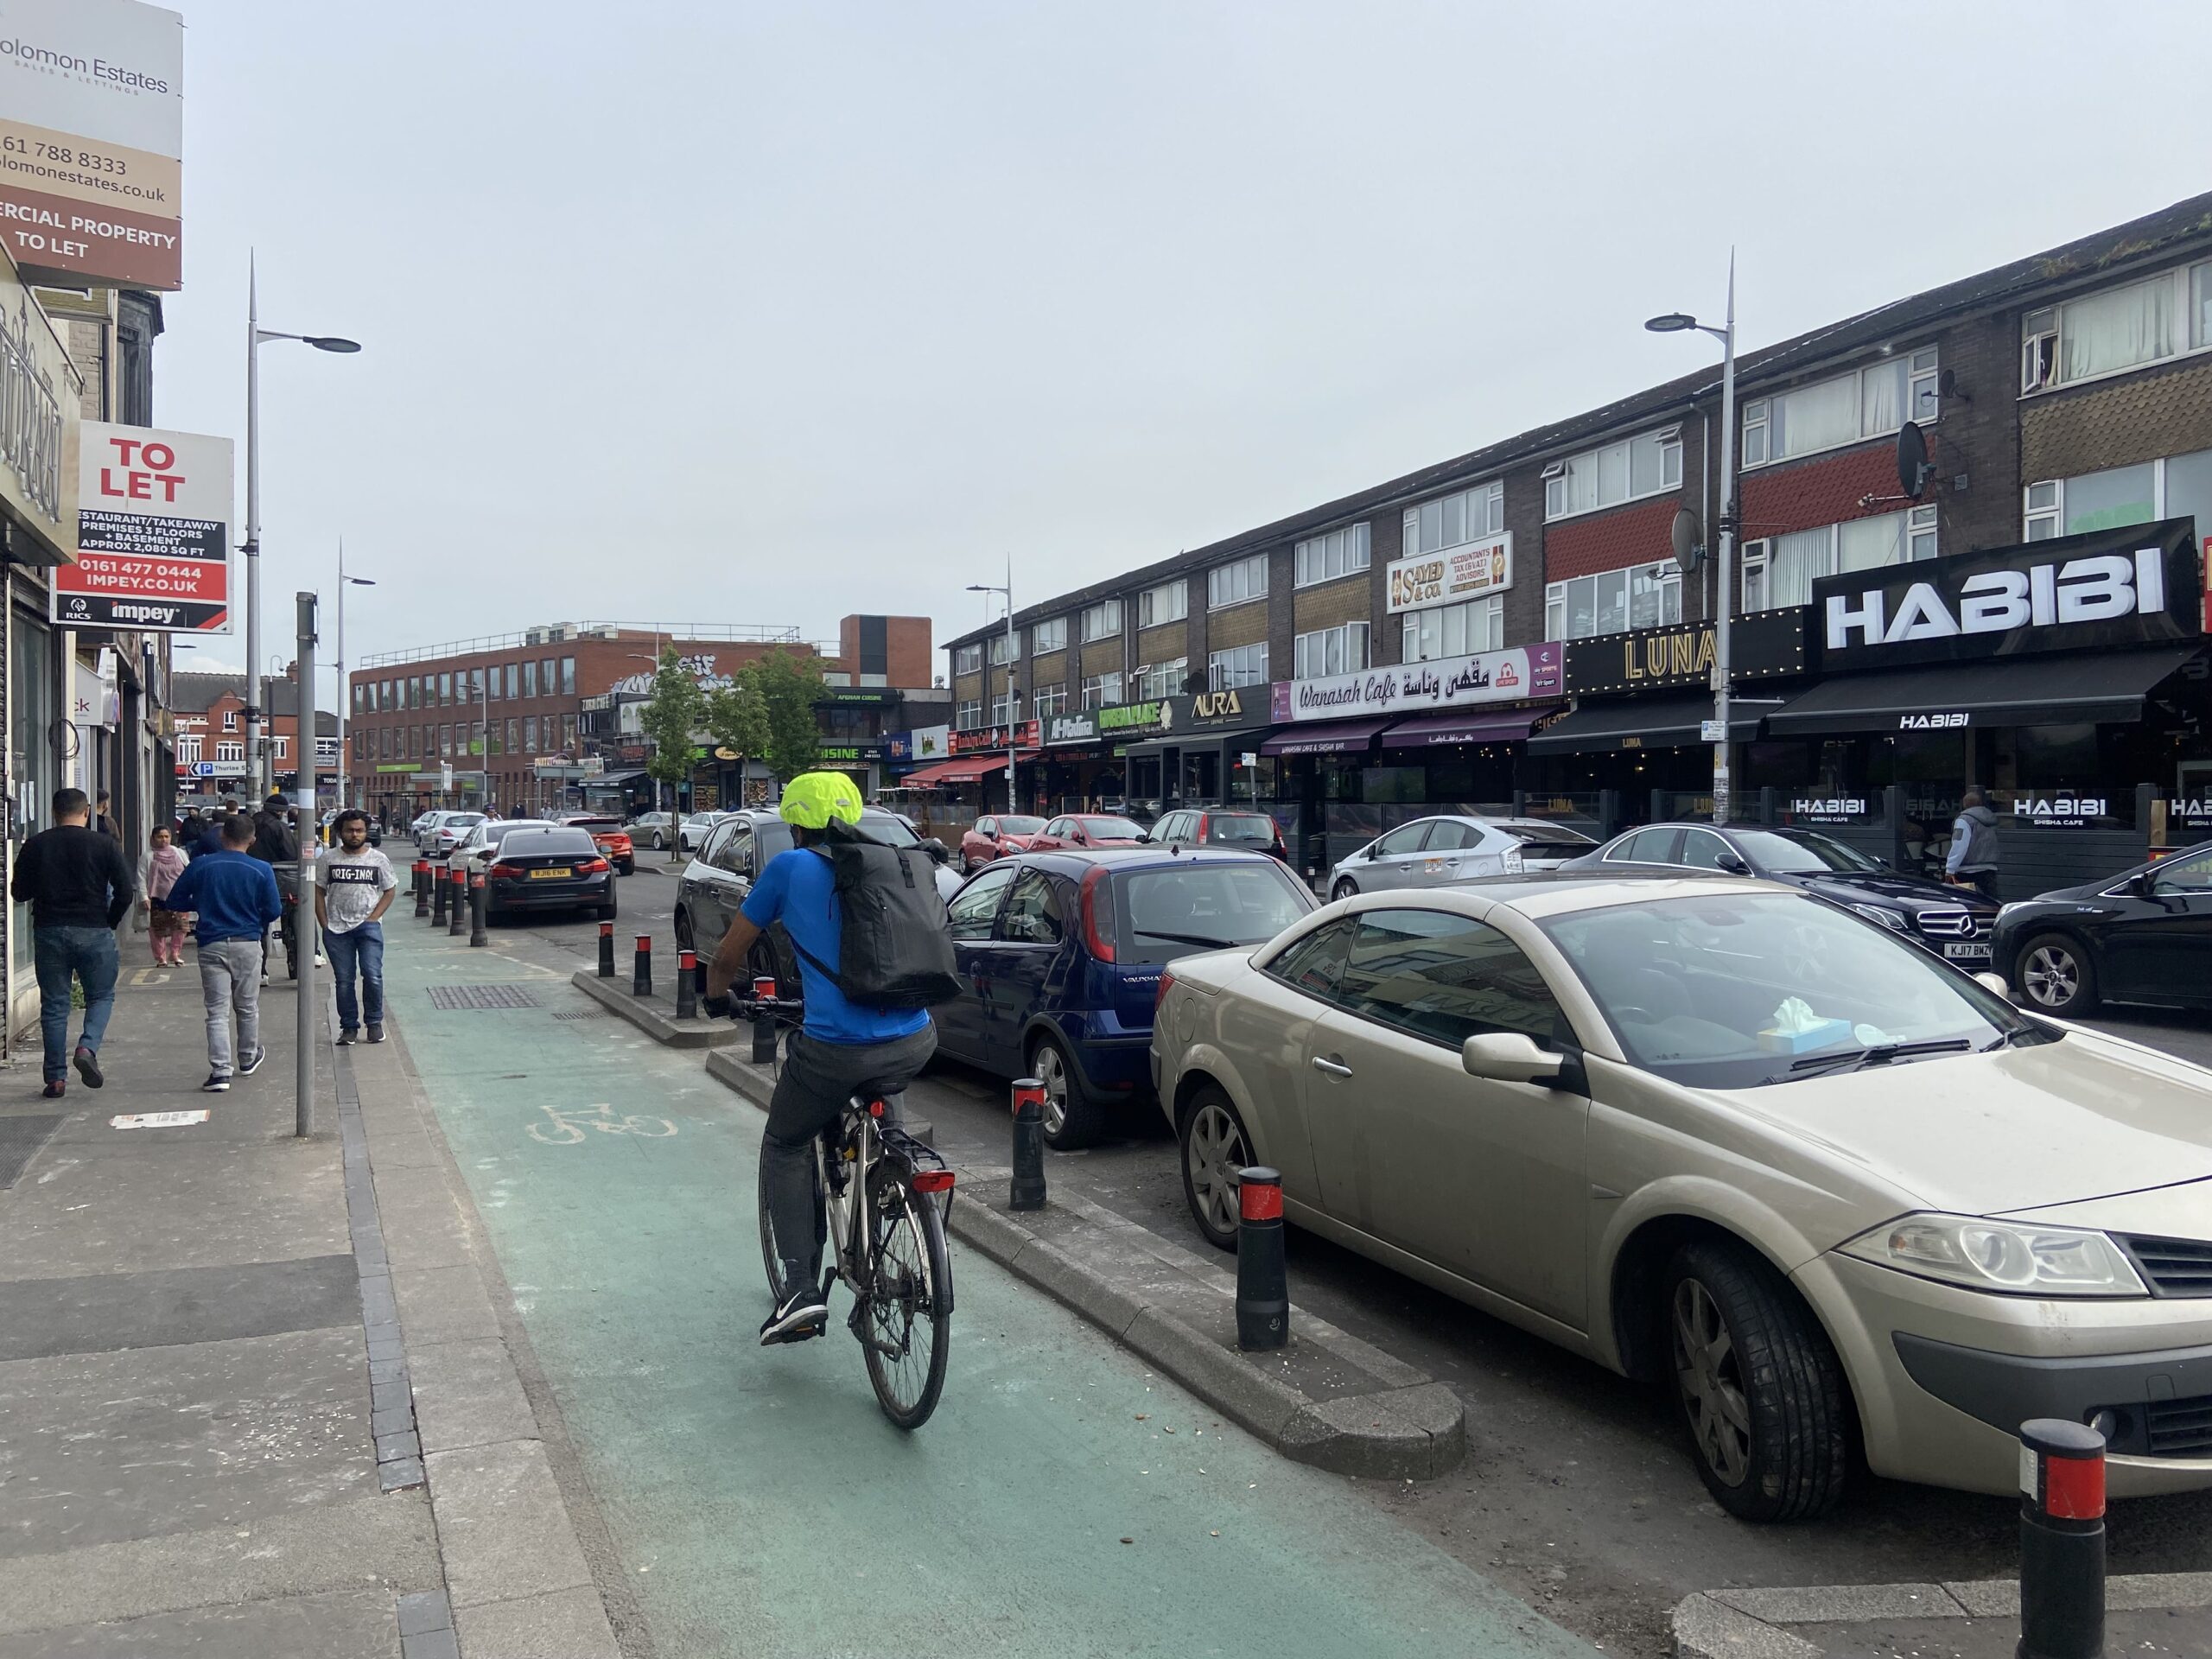 A photograph of cars parked along with curry mile with a cyclist using the cycle lane.